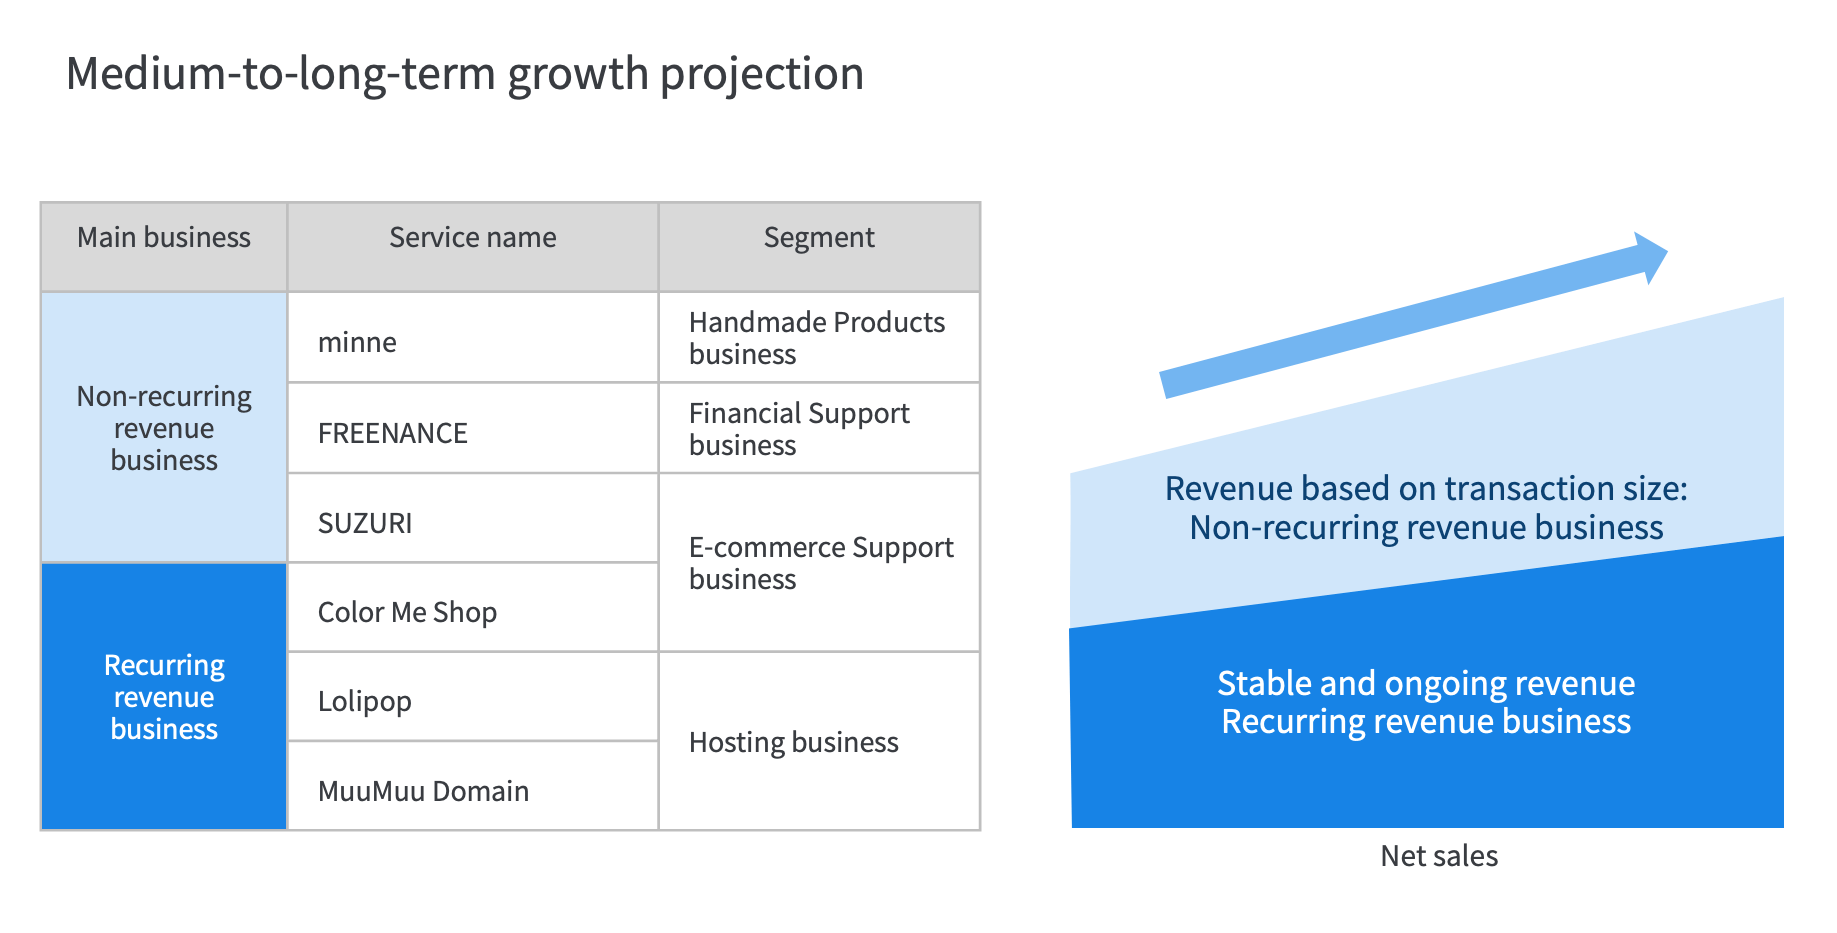 This chart visualizes the medium-to-long term growth image of flow-type business and stock-type business, respectively. We aim to achieve our consolidated operating income target of 1.57 billion yen for the fiscal year ending December 31, 2026, by growing flow-type businesses while maintaining stock-type businesses as the foundation. Please refer to the above text for the classification of each major business and service.